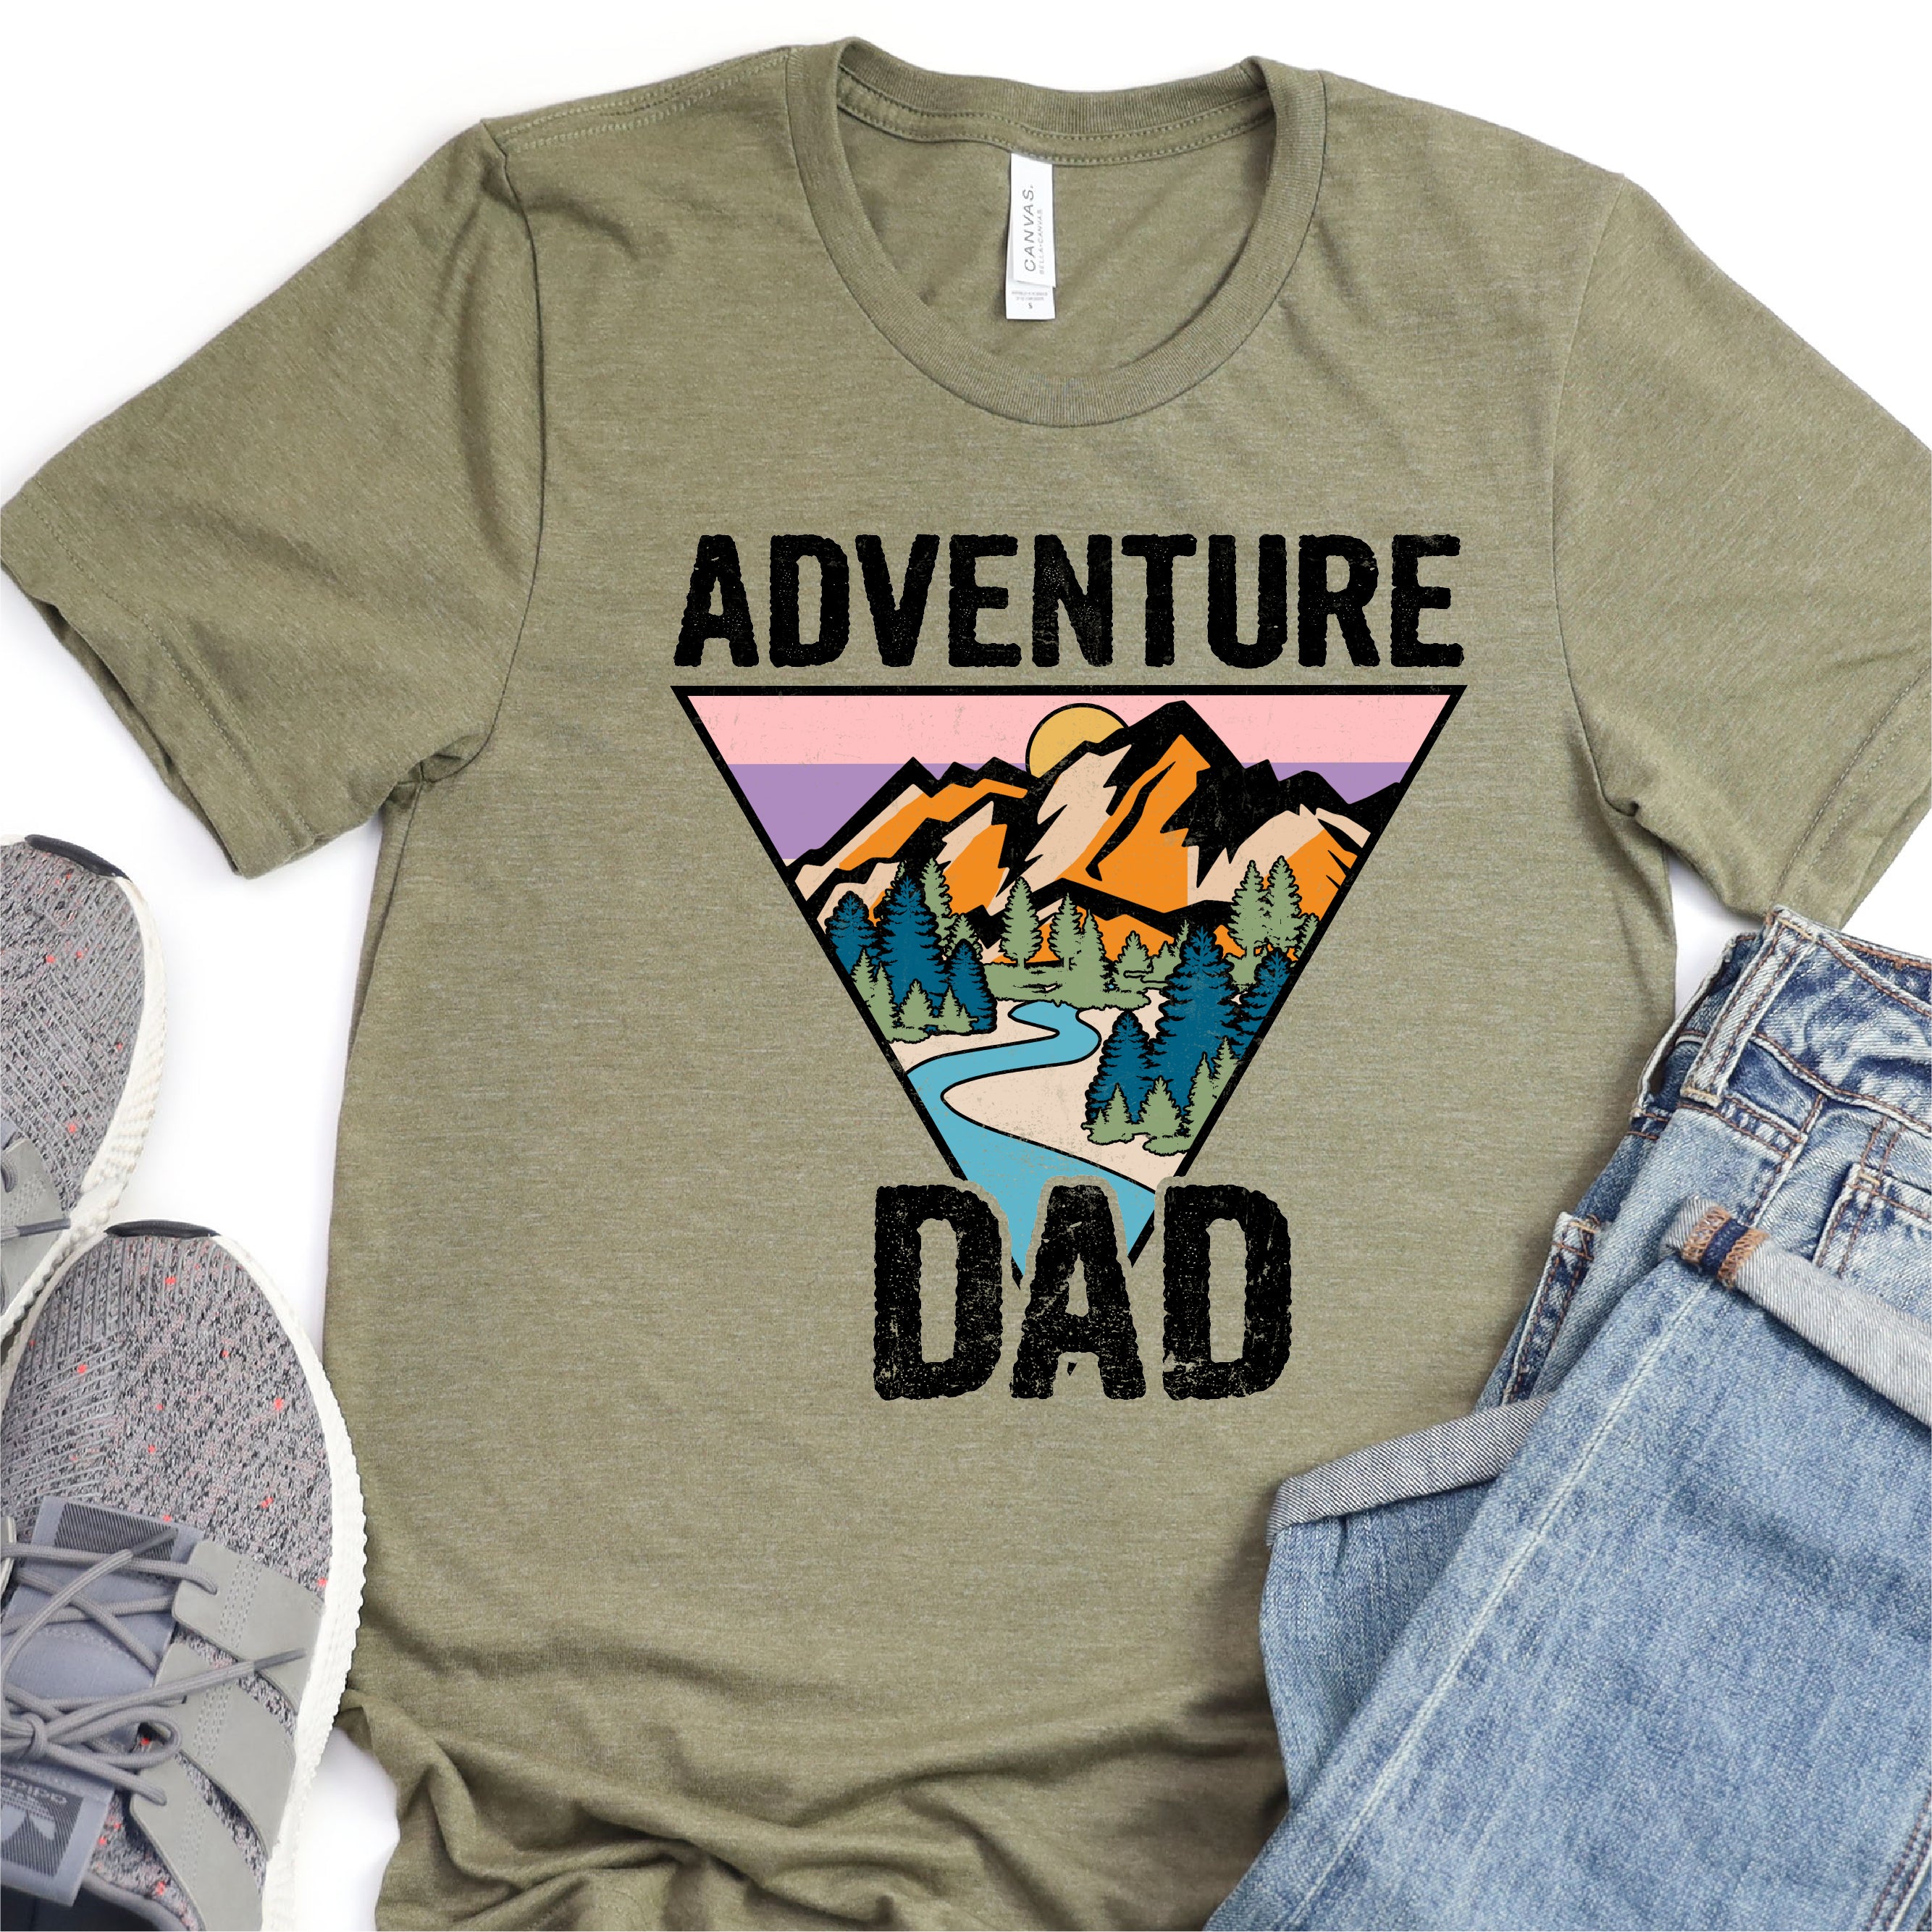 Adventire Dad - Father's Day DTF Transfer - T-shirt Transfer For Dad Nashville Design House